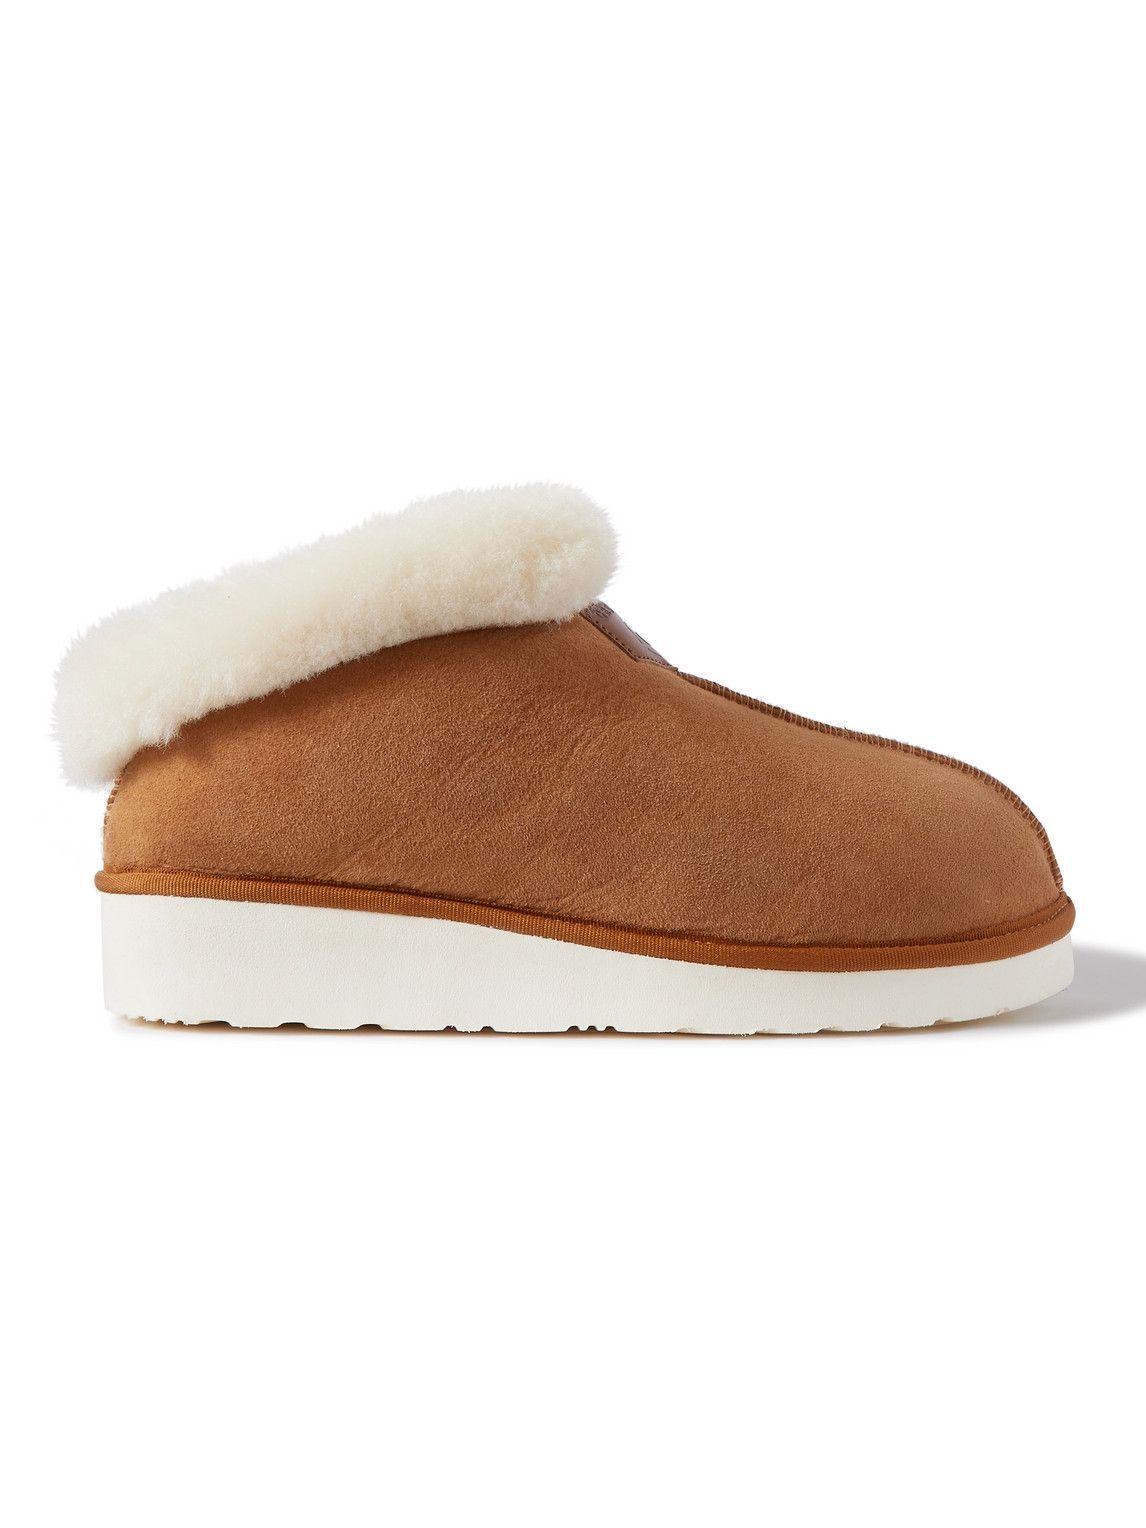 Photo: Grenson - Wyeth Shearling-Lined Suede Slippers - Brown